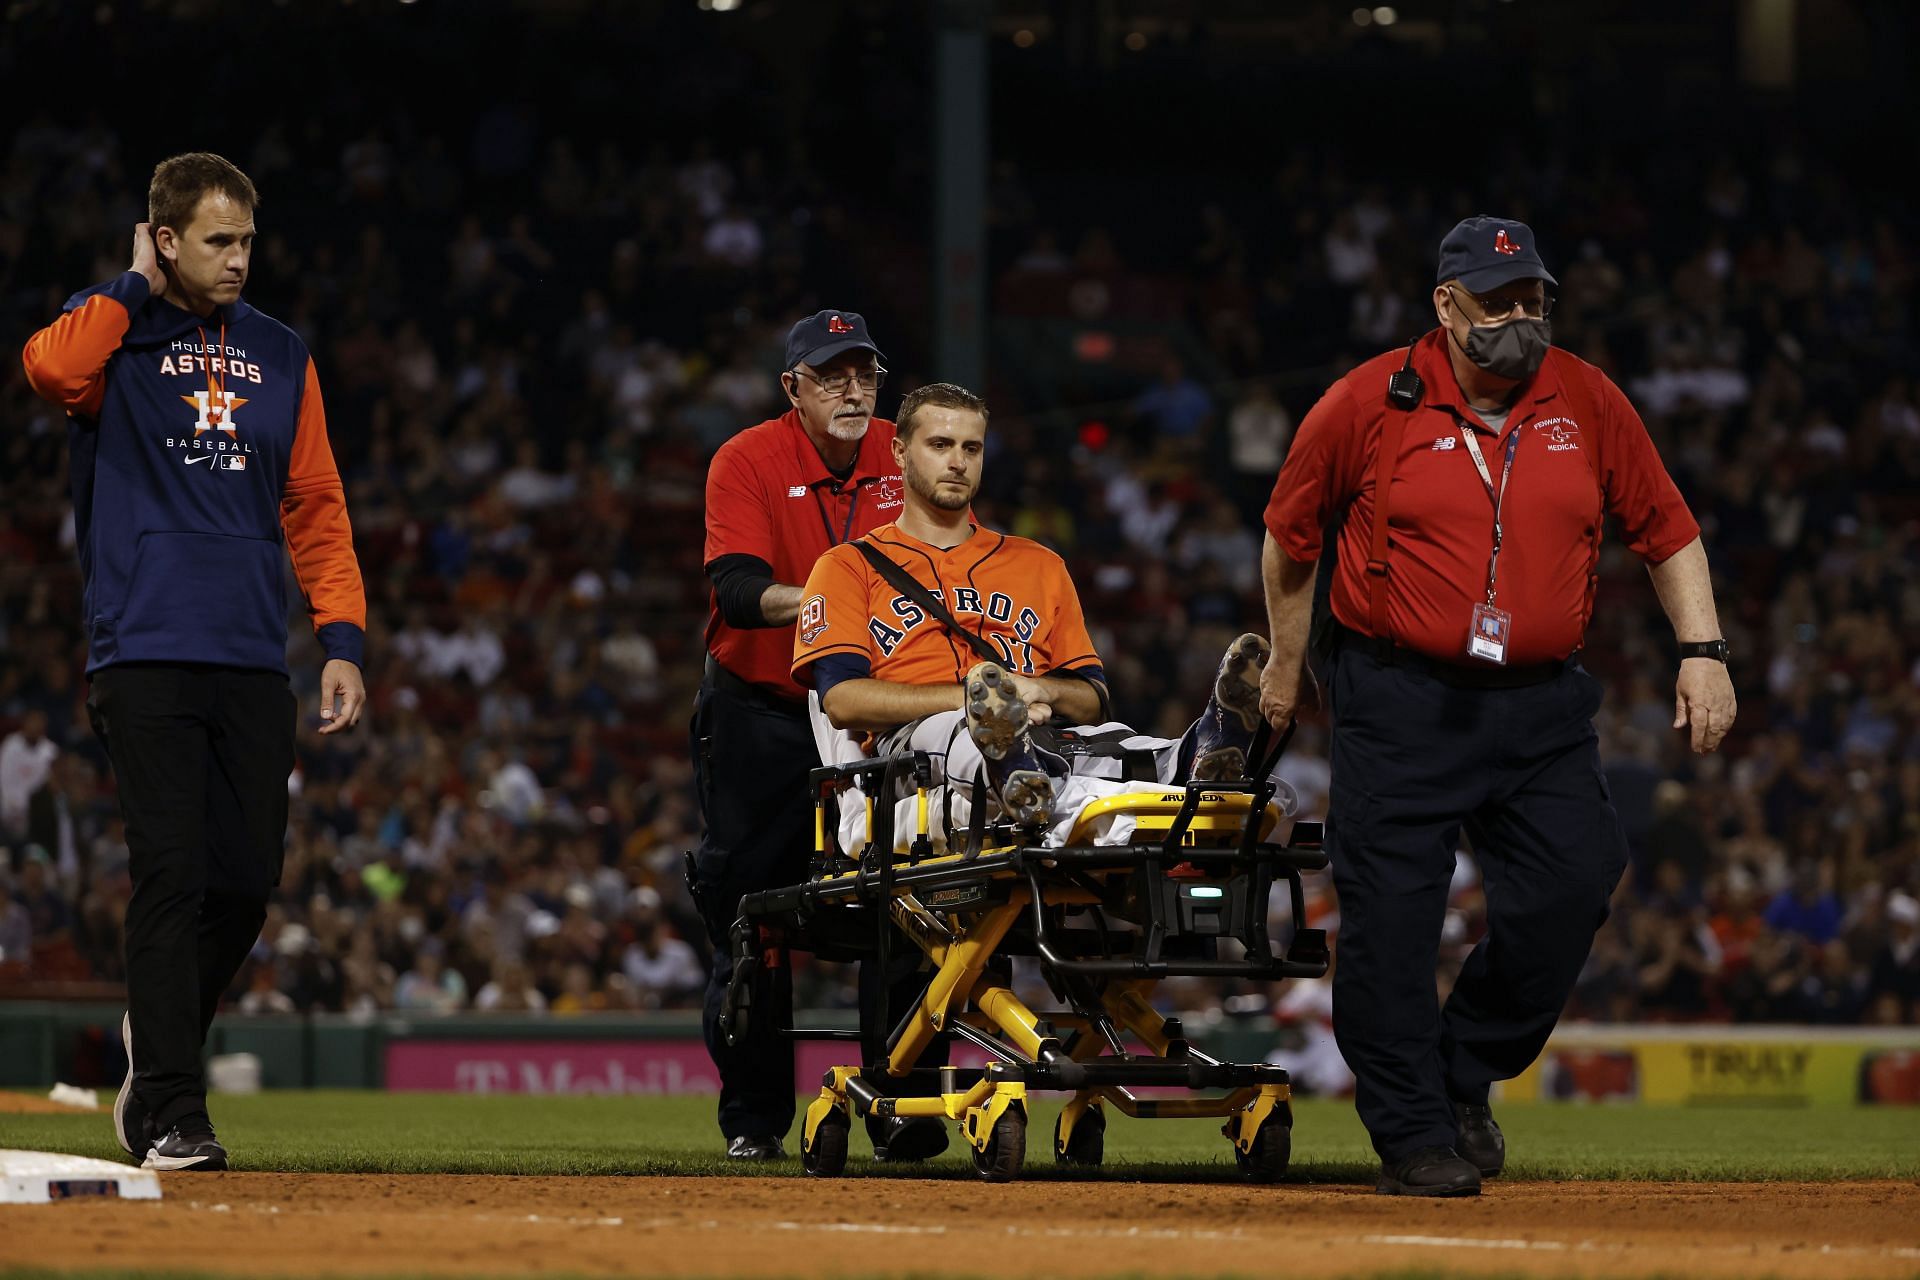 Houston Astros starter Odorizzi is carried out on a stretcher after suffering an apparently serious injury to his left leg at Fenway Park.